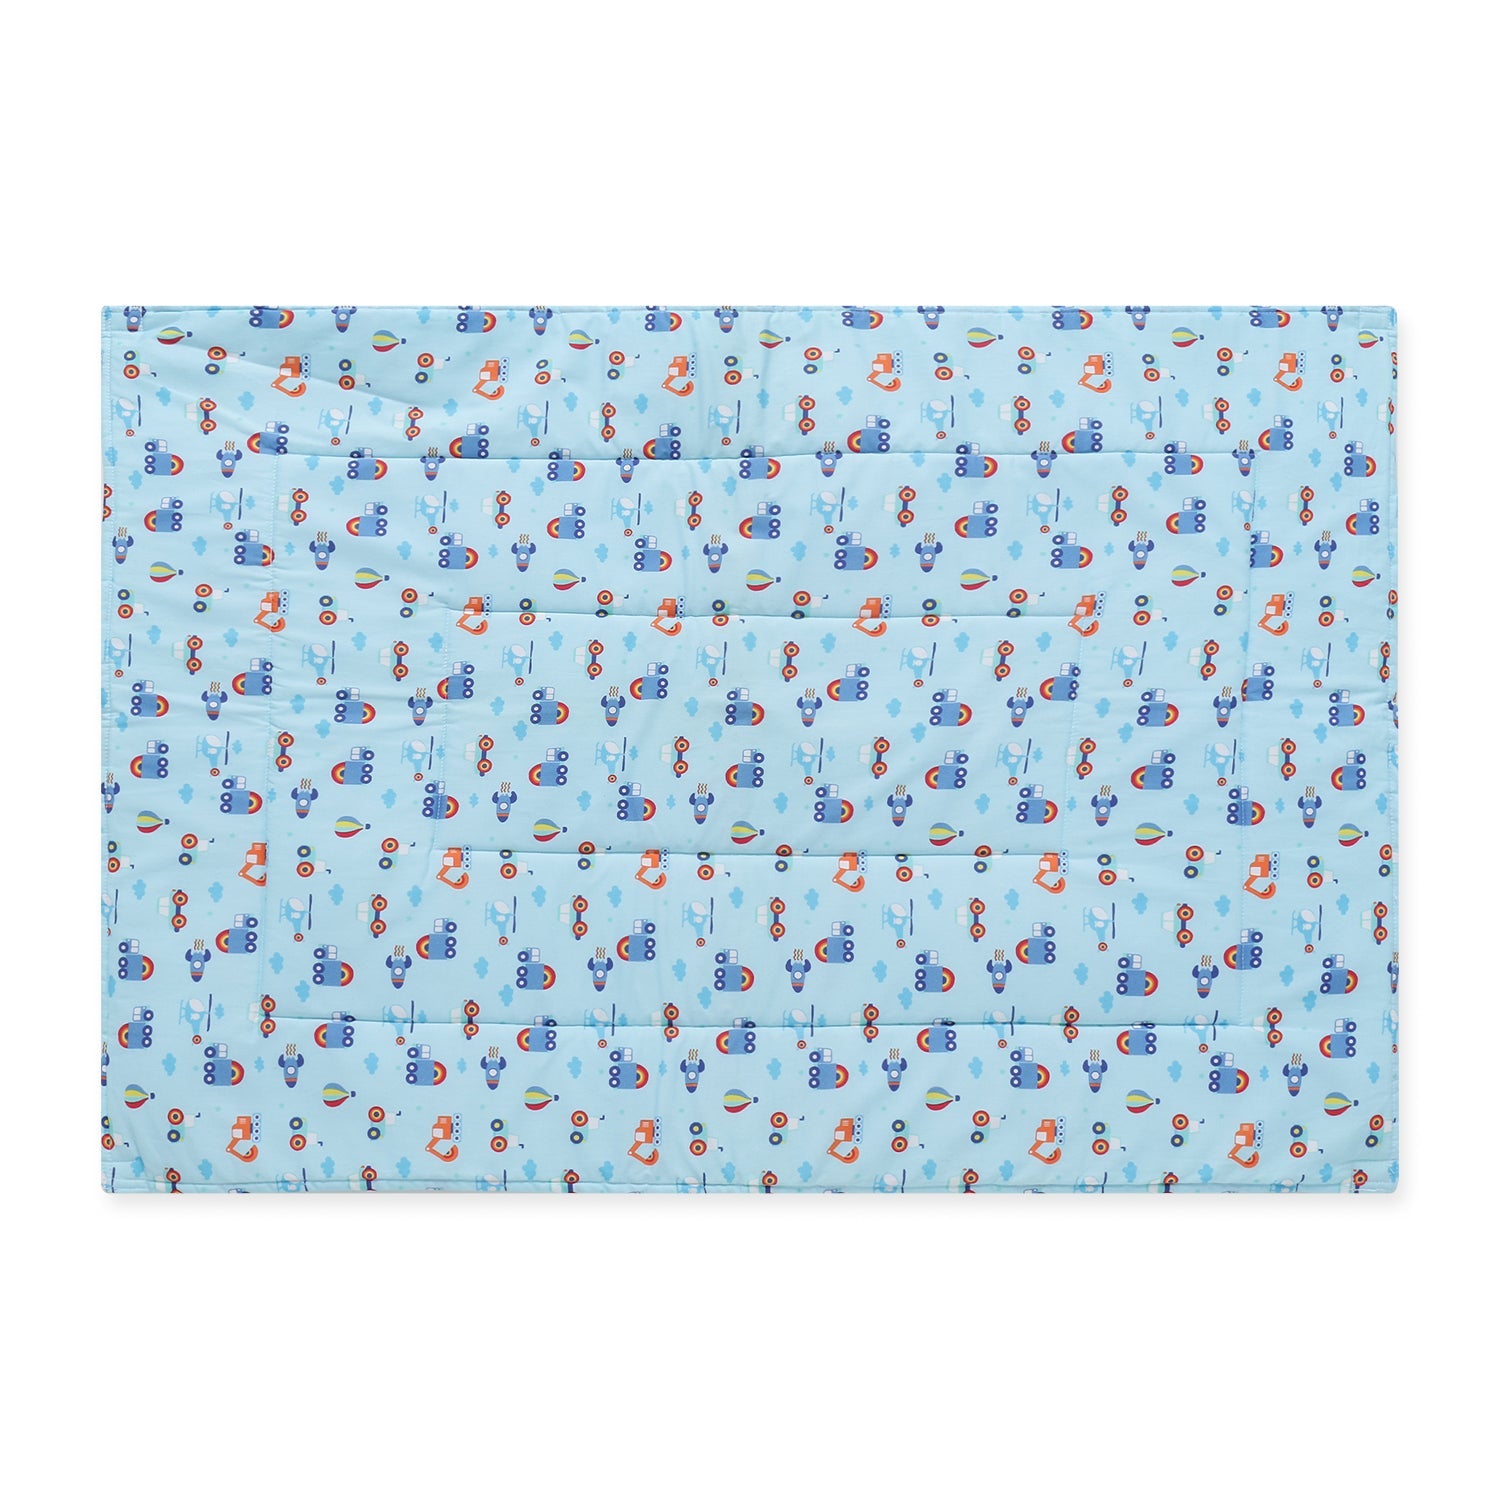 Giggles & Wiggles Waterproof Ultra-Soft Diaper Nappy Changing Mats For Baby